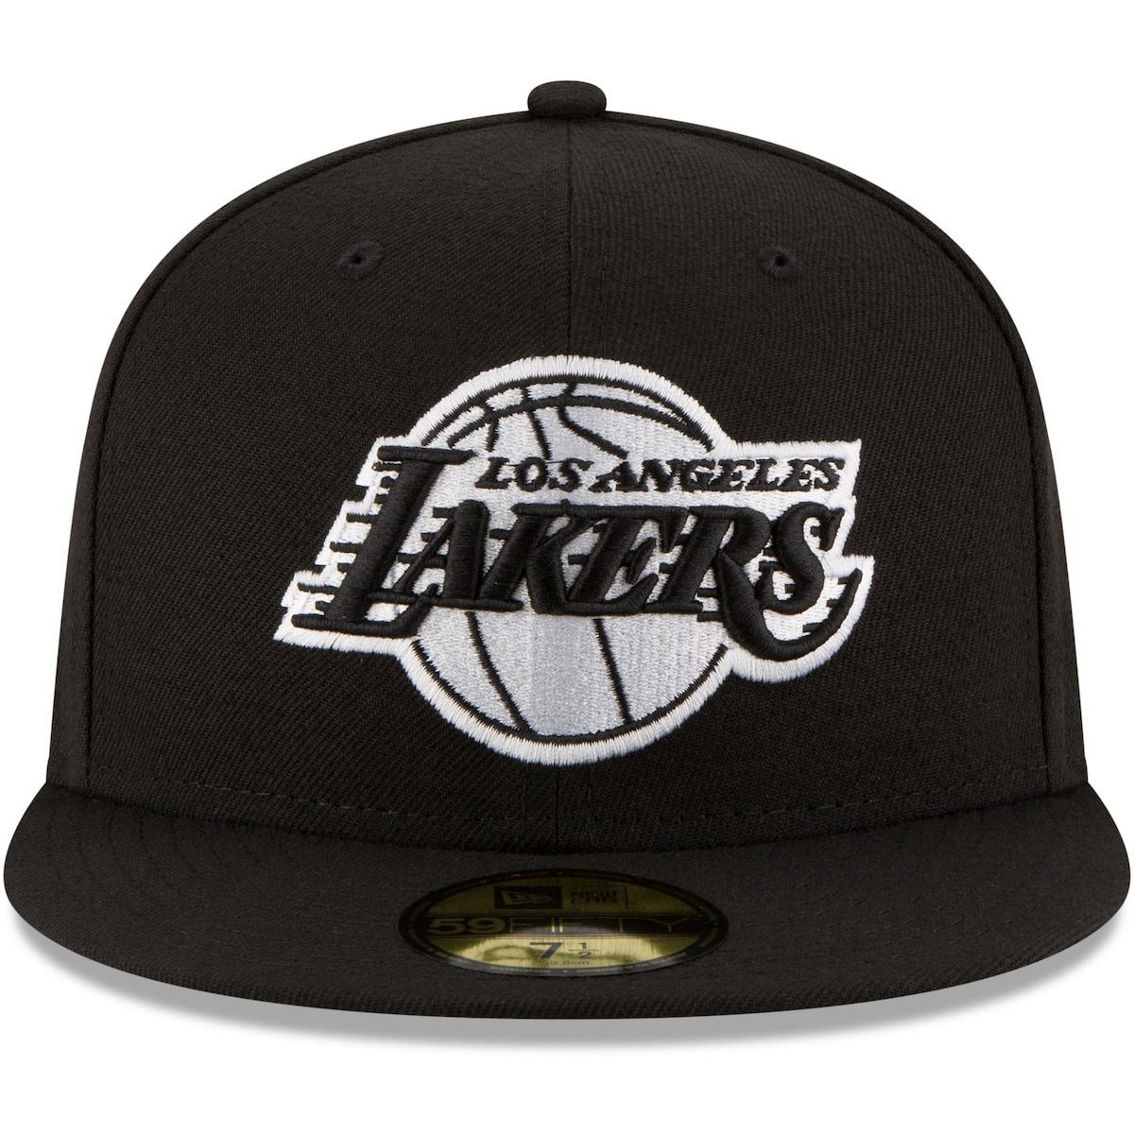 New Era Men's Black Los Angeles Lakers Black & White Logo 59FIFTY Fitted Hat - Image 3 of 4